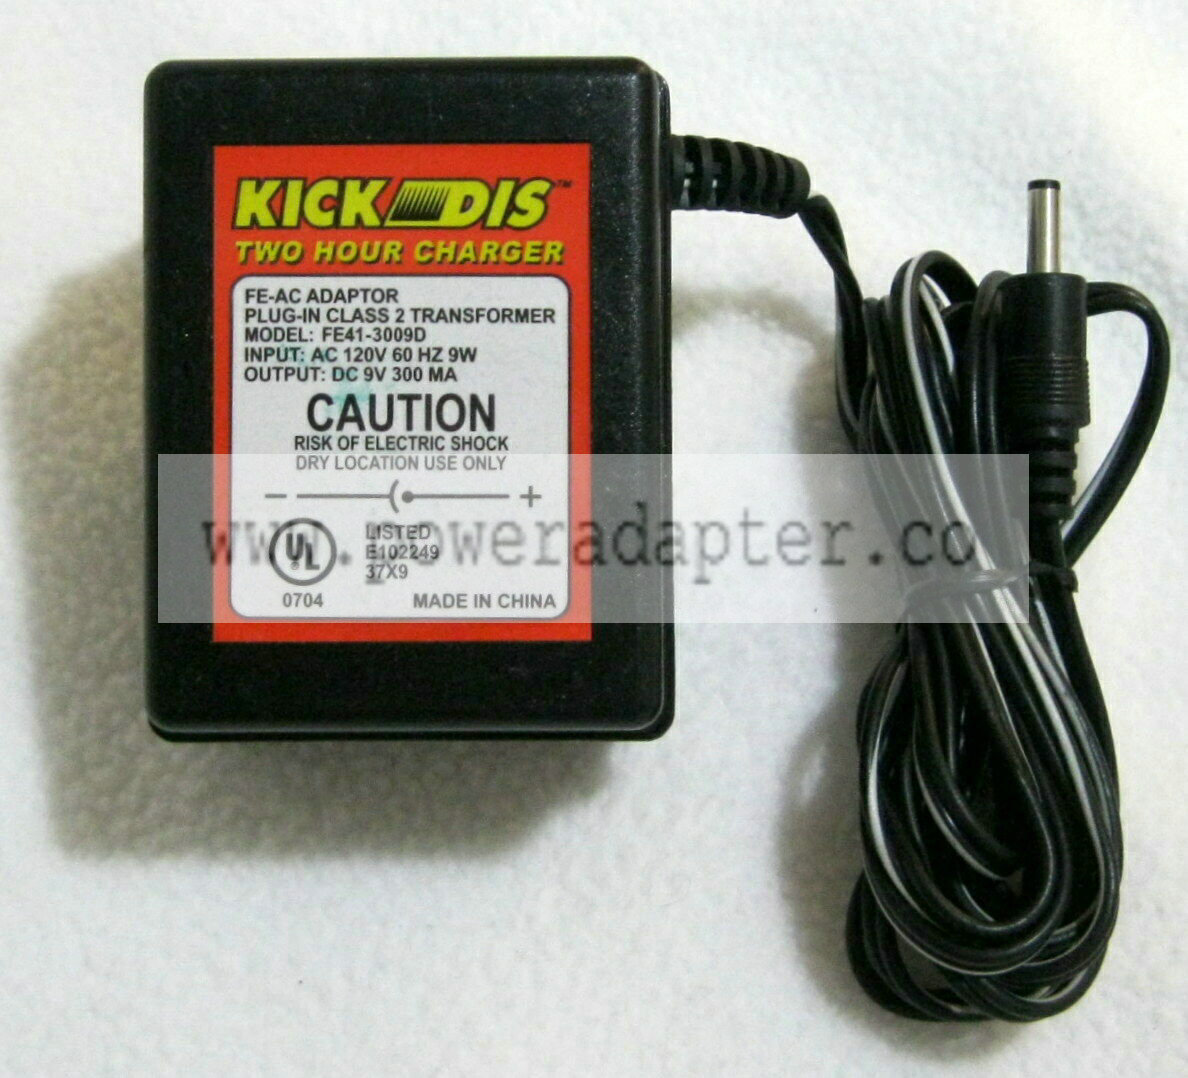 KICK DIS FE41-3009D Two Hour Charger AC Adaptor DC 9V 300mA EXCELLENT - TESTED Brand: Kick Dis Type: AC/DC Adapter M